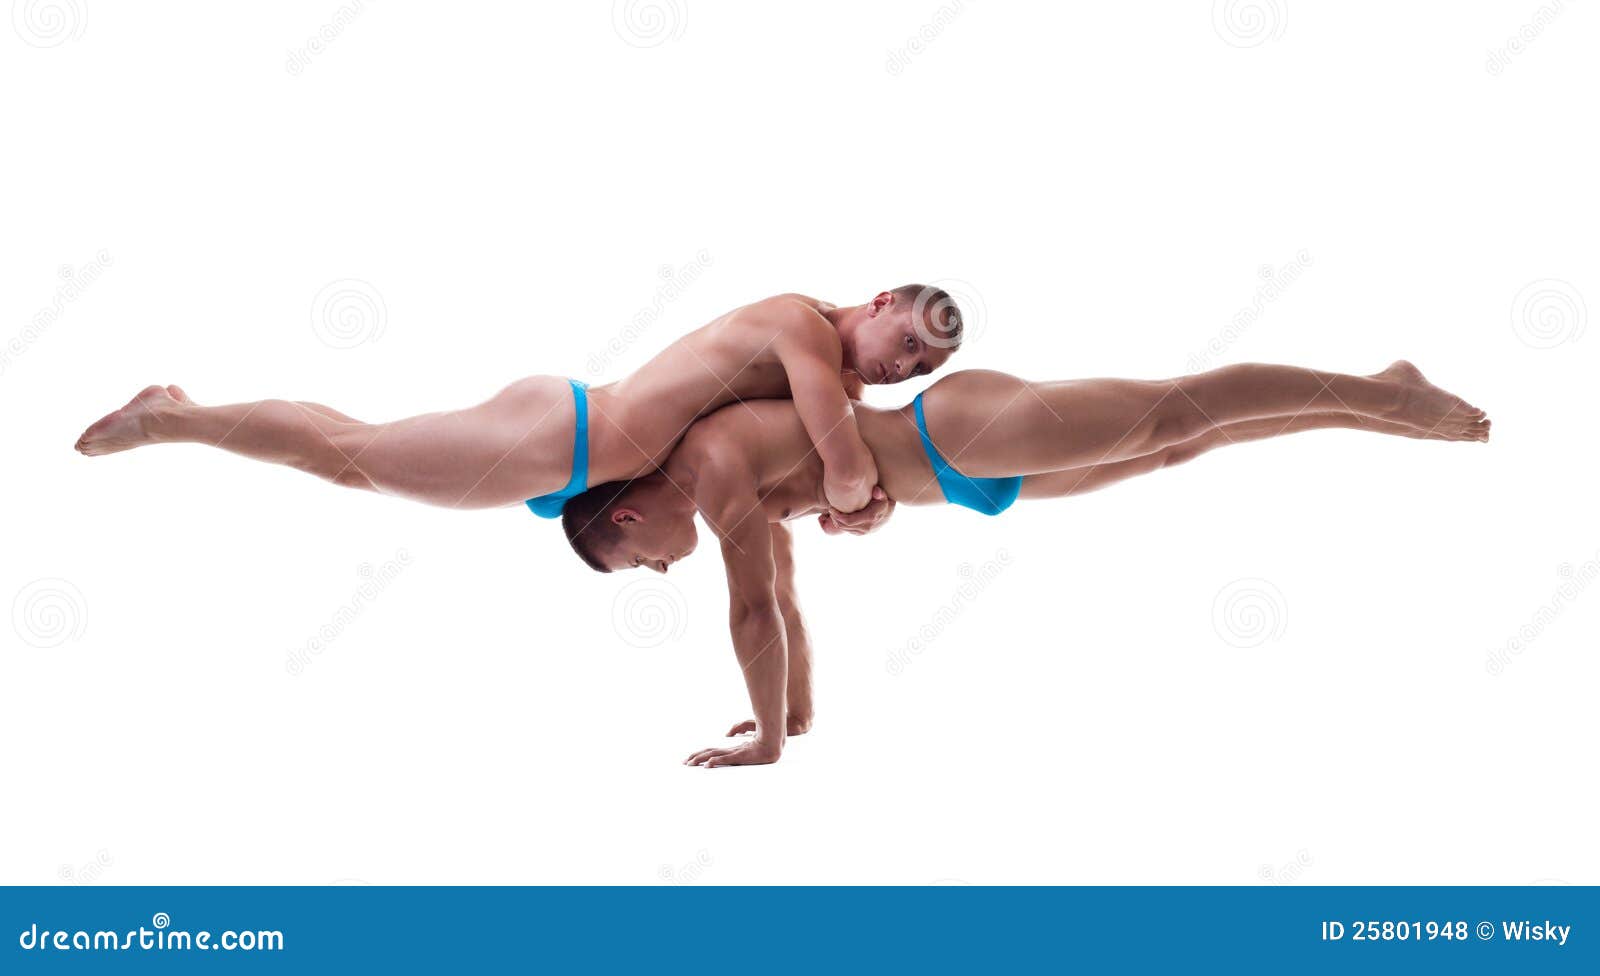 8,849 Gymnastic Poses 2 People Images, Stock Photos & Vectors | Shutterstock